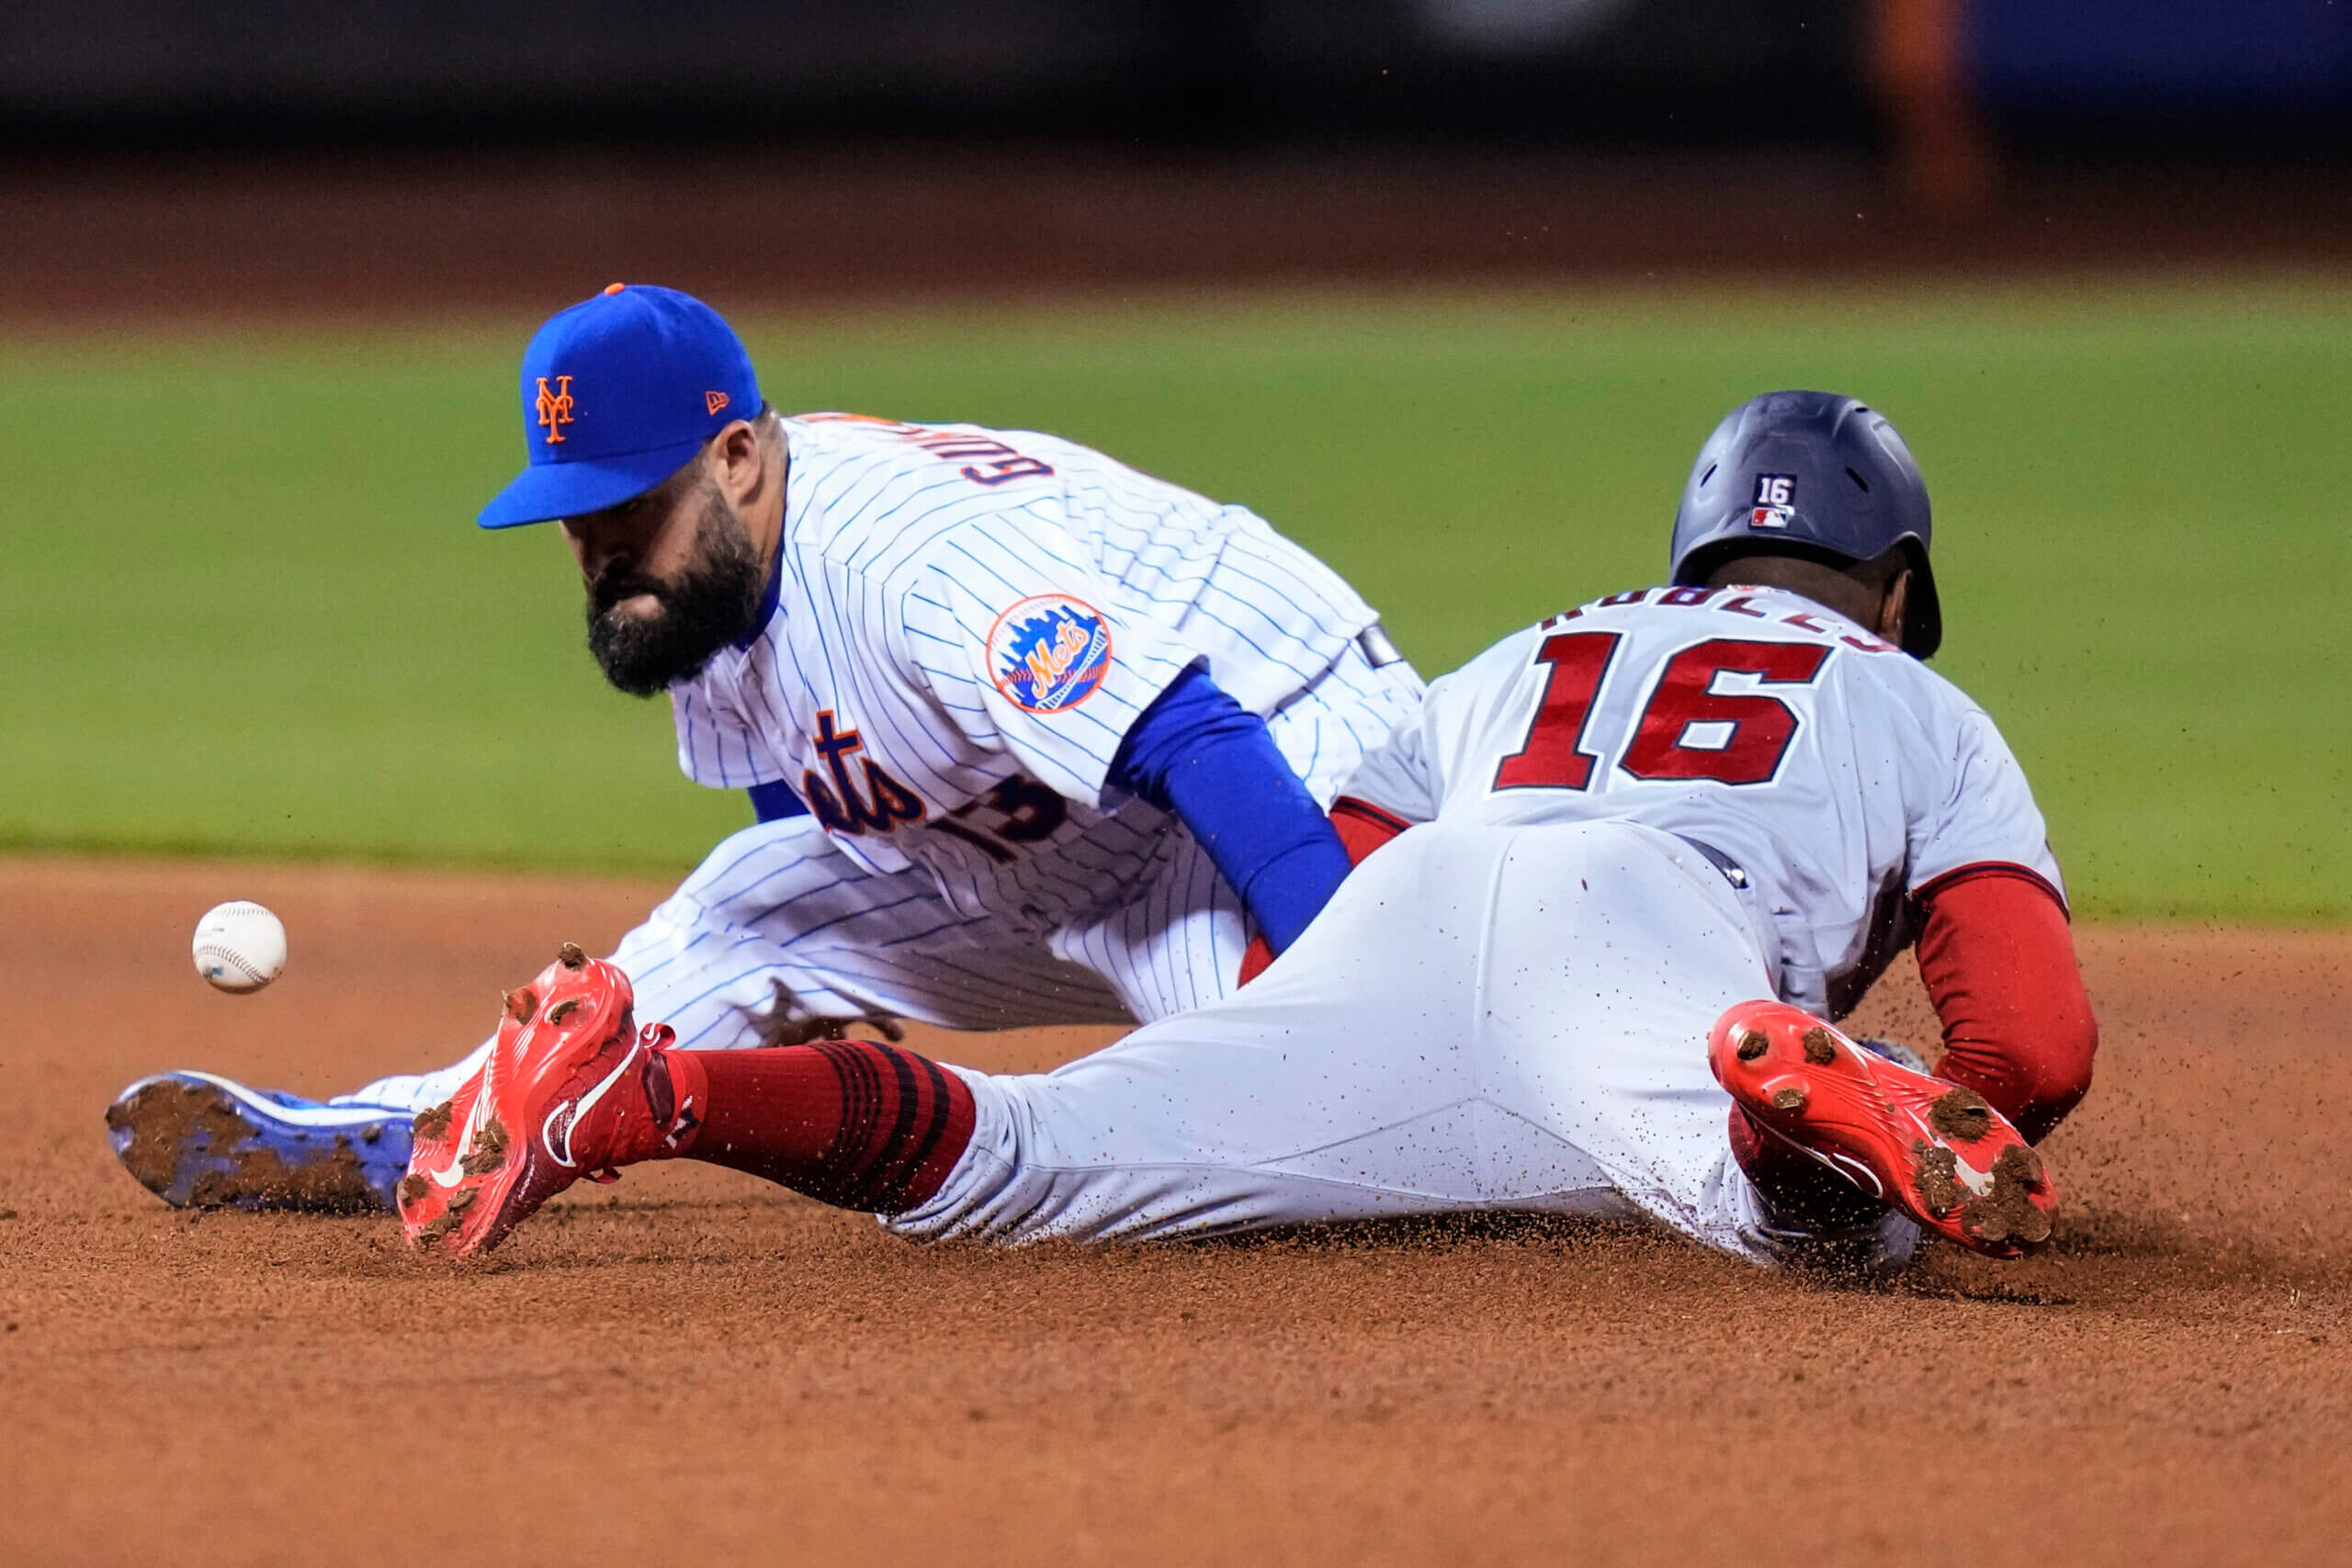 Luis Guillorme, Mets walk off Dodgers to avoid sweep